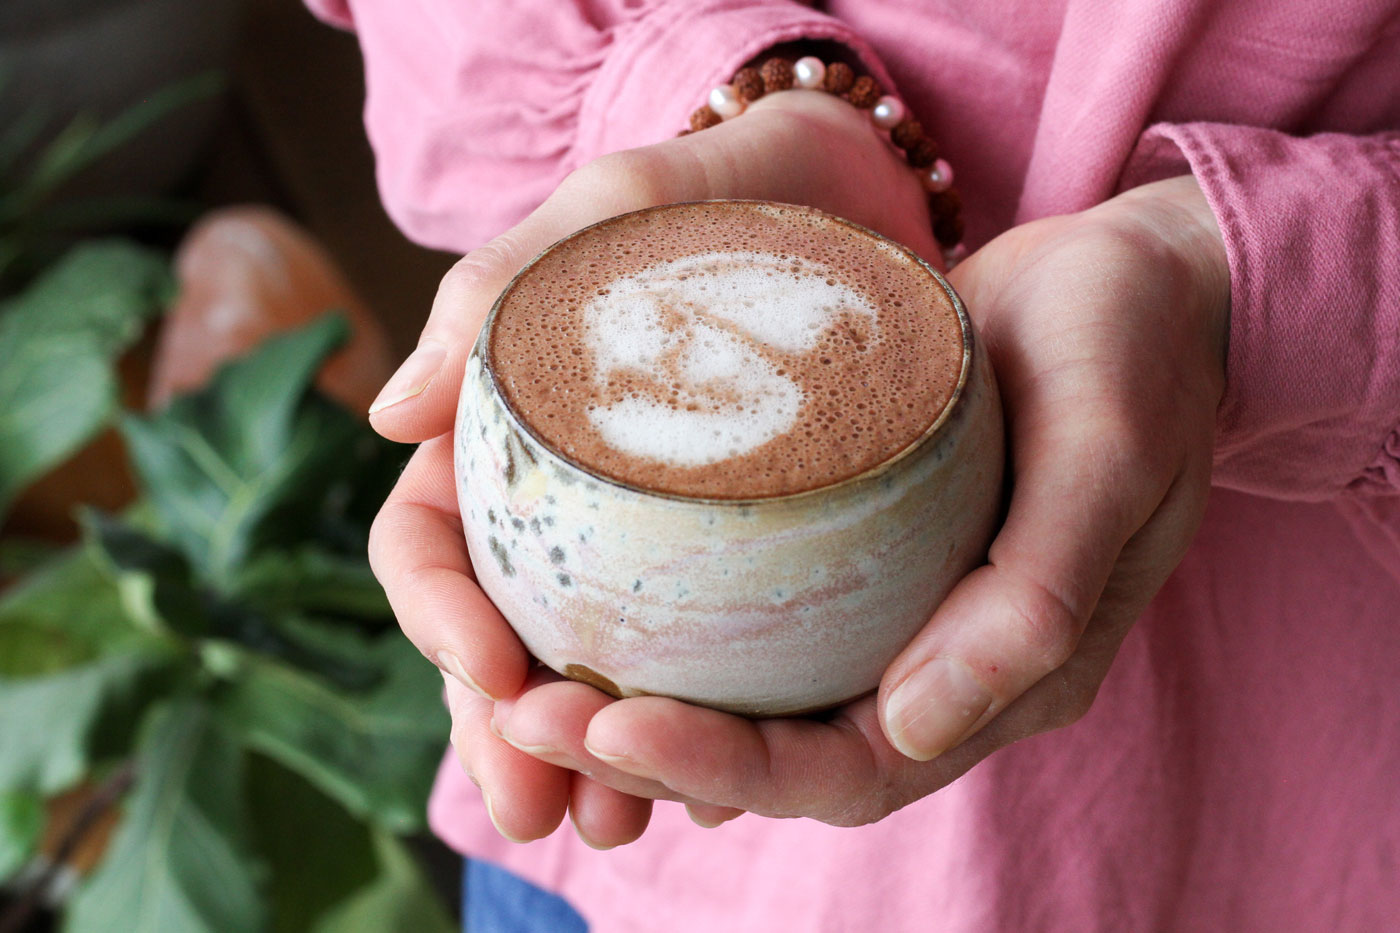 medicinal mushroom hot chocolate for Immune Support by Active Vegetarian